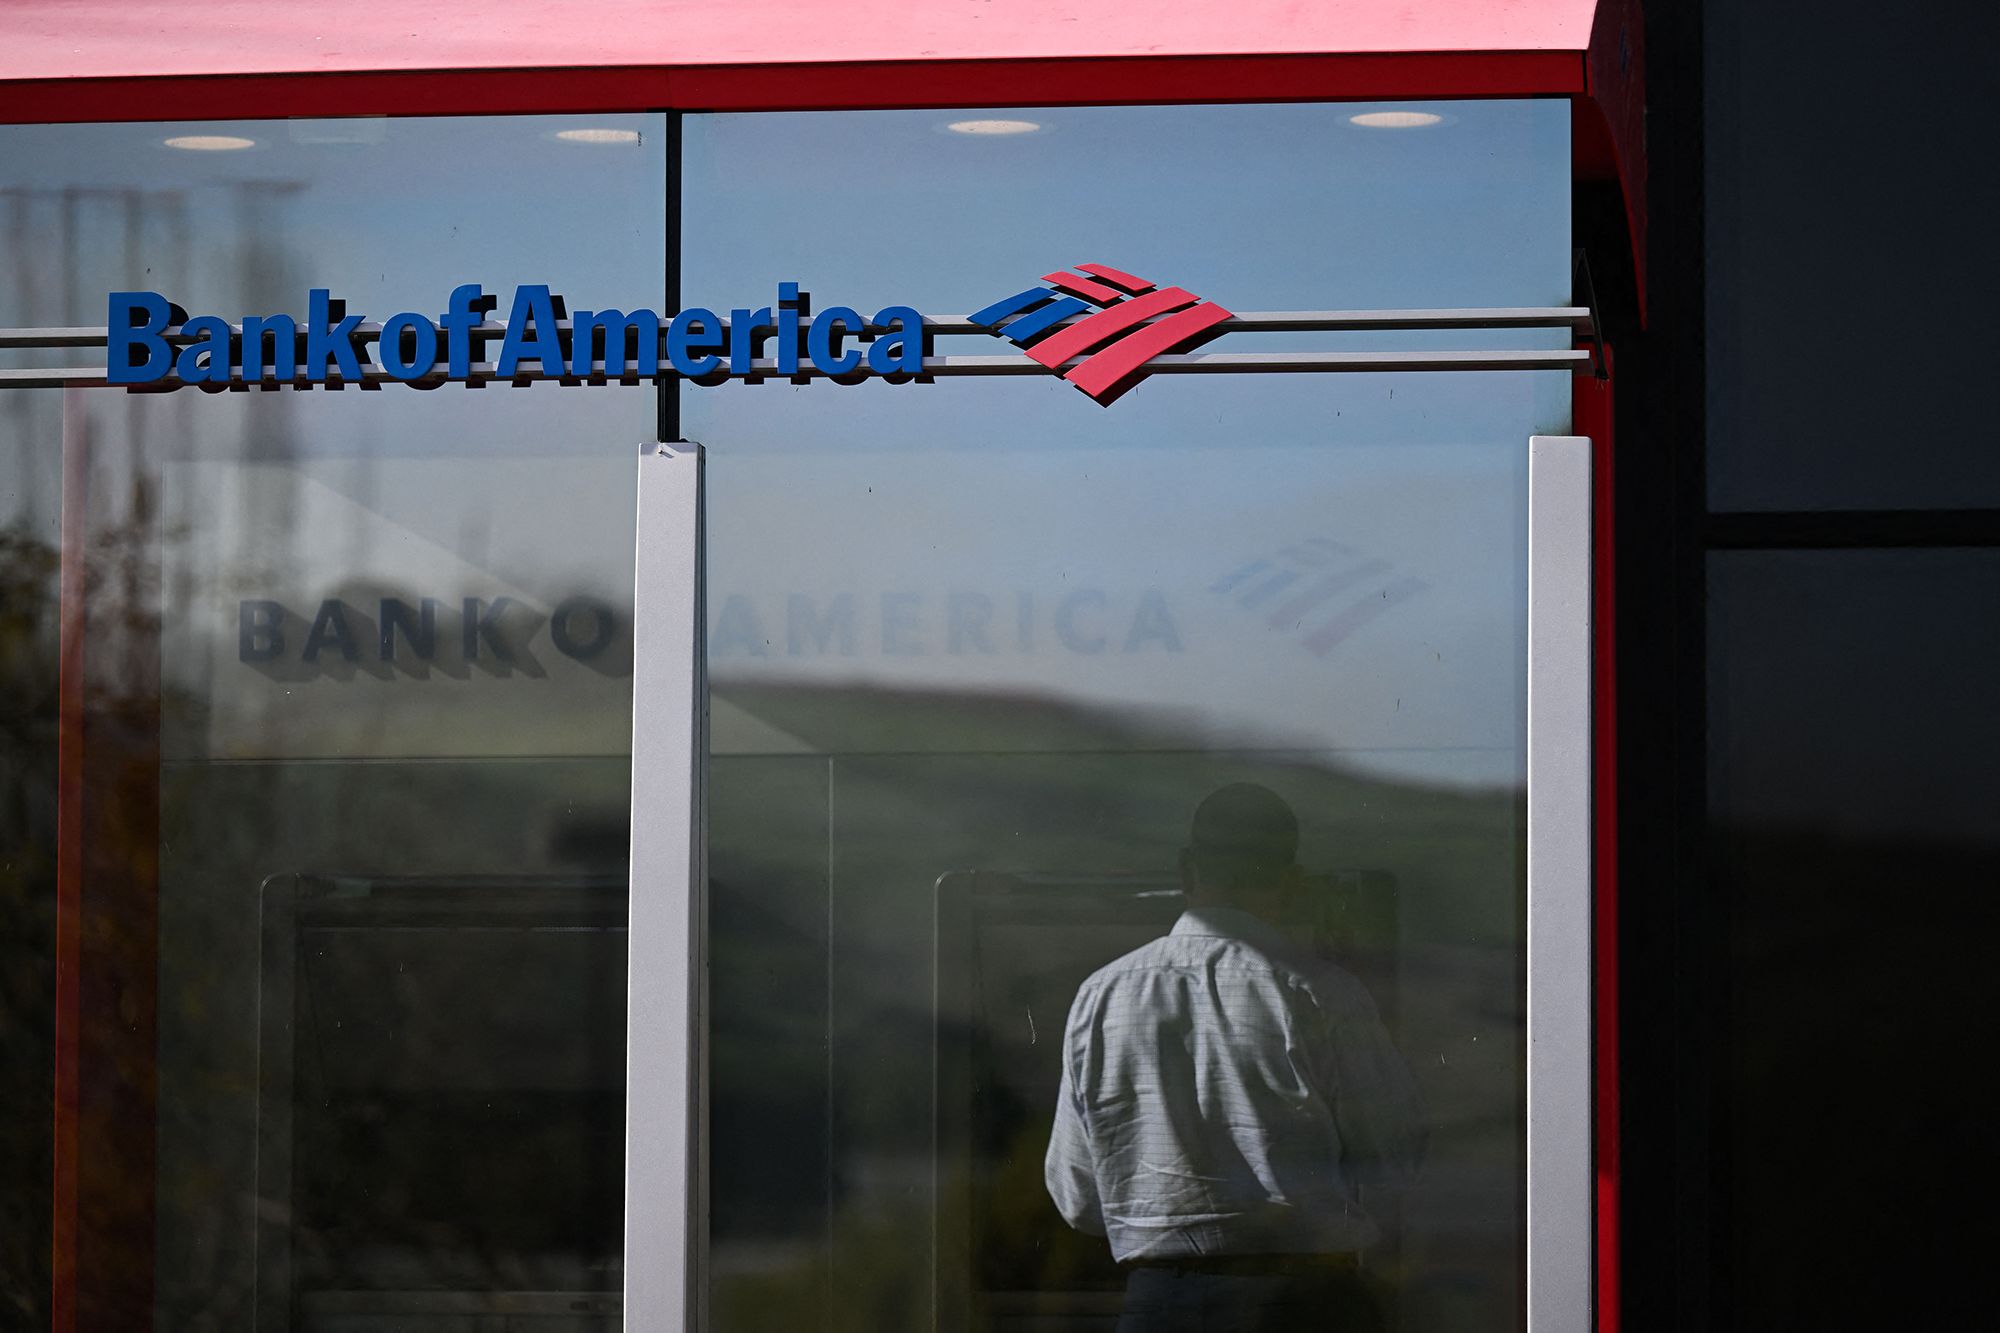 Bank of America in Chicago with Walk-Up ATM